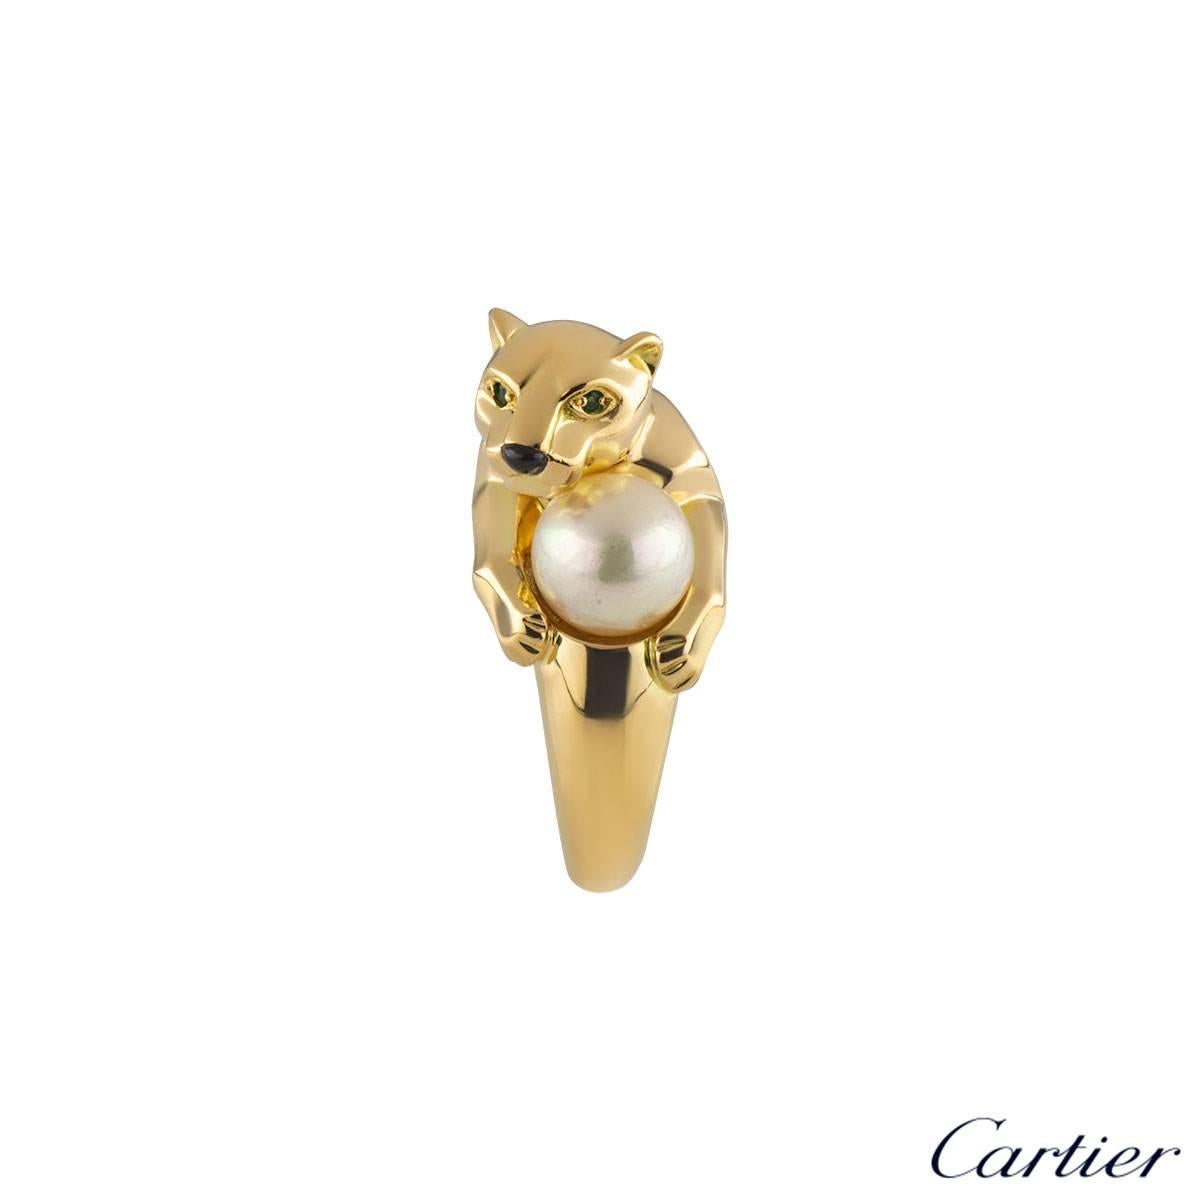 A unique 18k yellow gold Panthere ring by Cartier. The ring features a Panthere's head with two emeralds set to the eyes and onyx for the nose. The panthere is clutching an 8mm cultured pearl between the paws. The Panthere measures 1.4cm in height